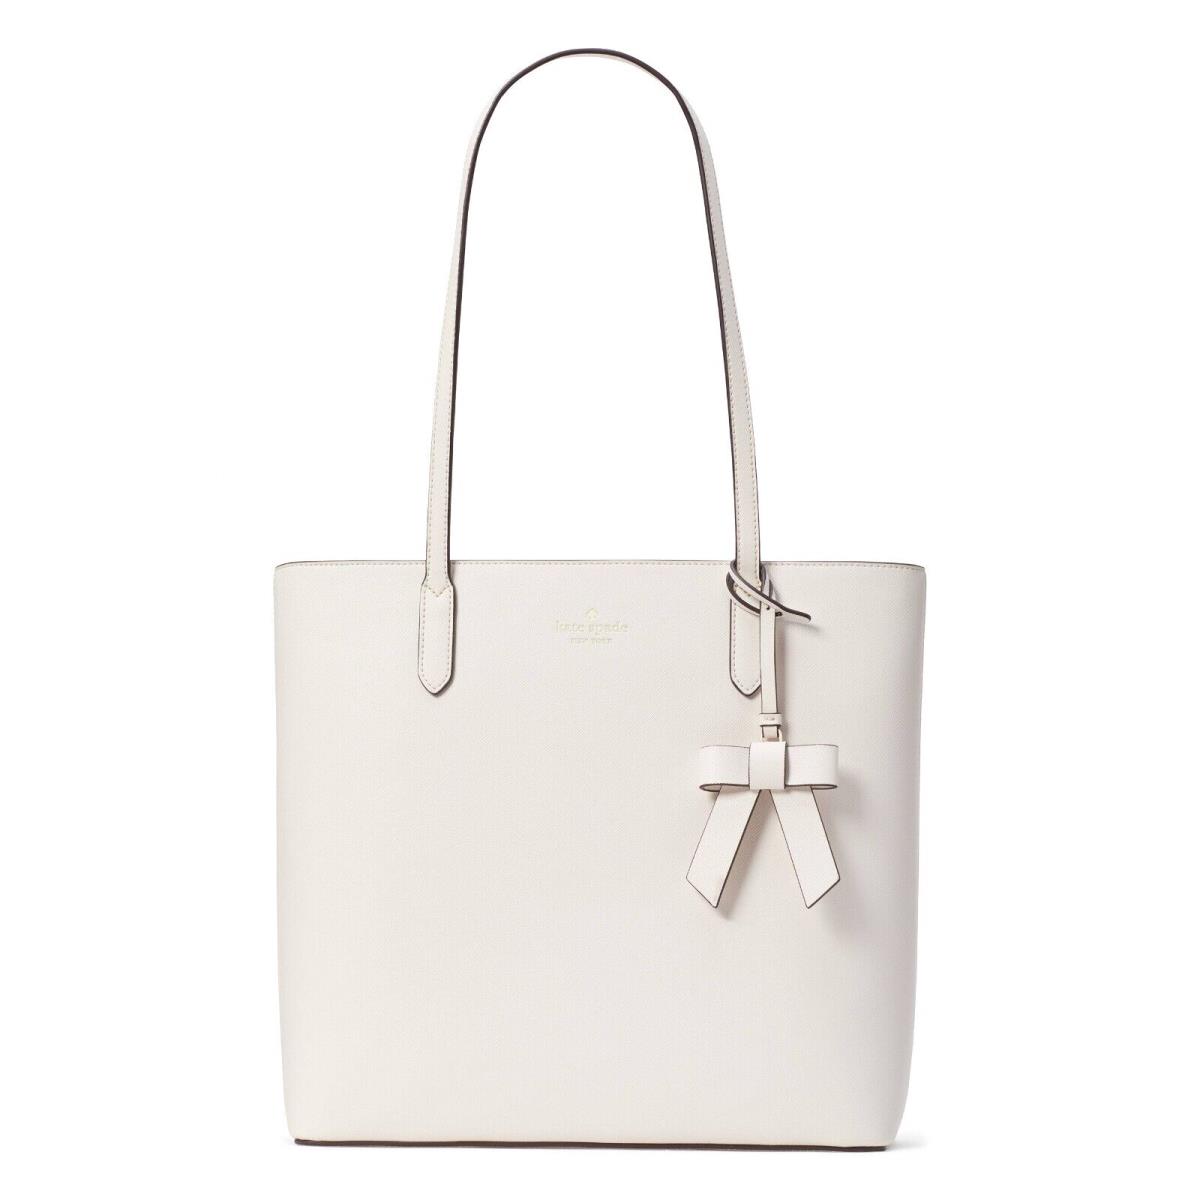 New Kate Spade Brynn Saffiano Tote Parchment - Exterior: